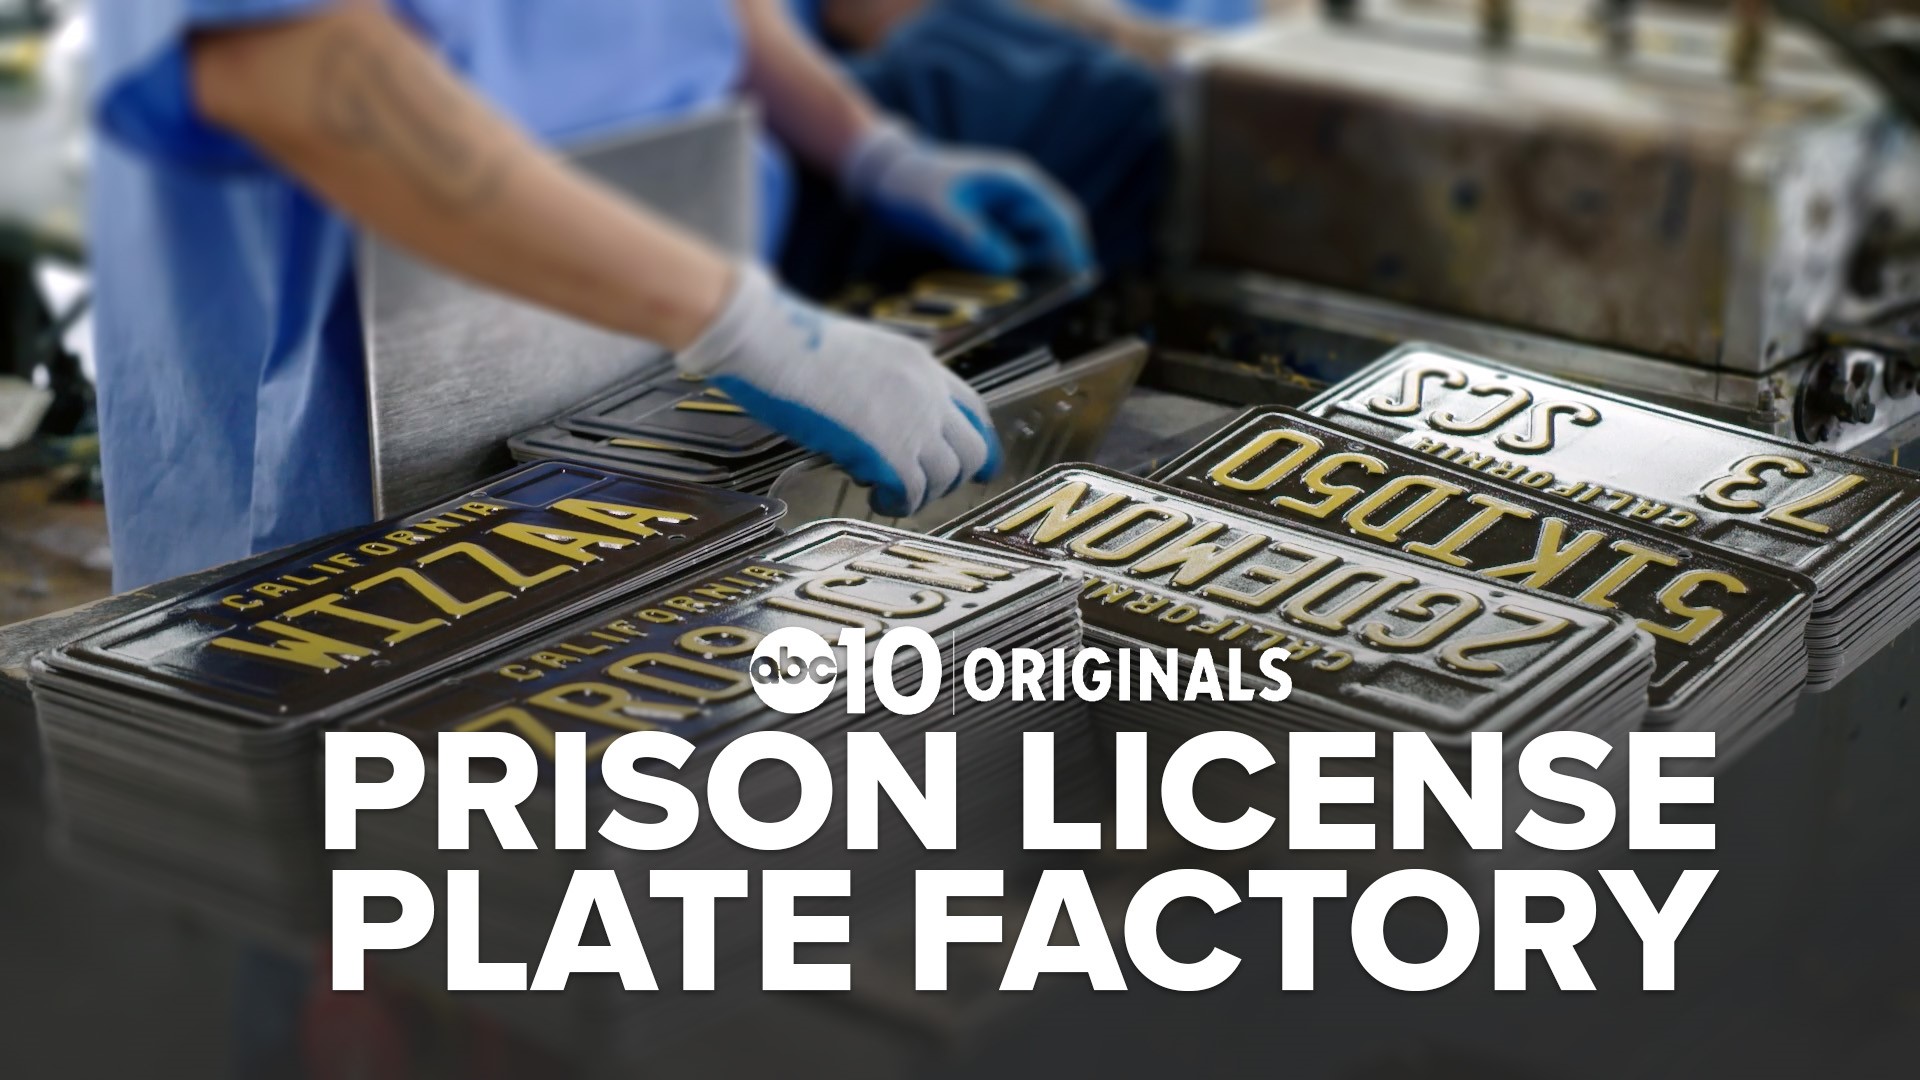 It may or may not be a big deal for the tiny California town making all the license plates.